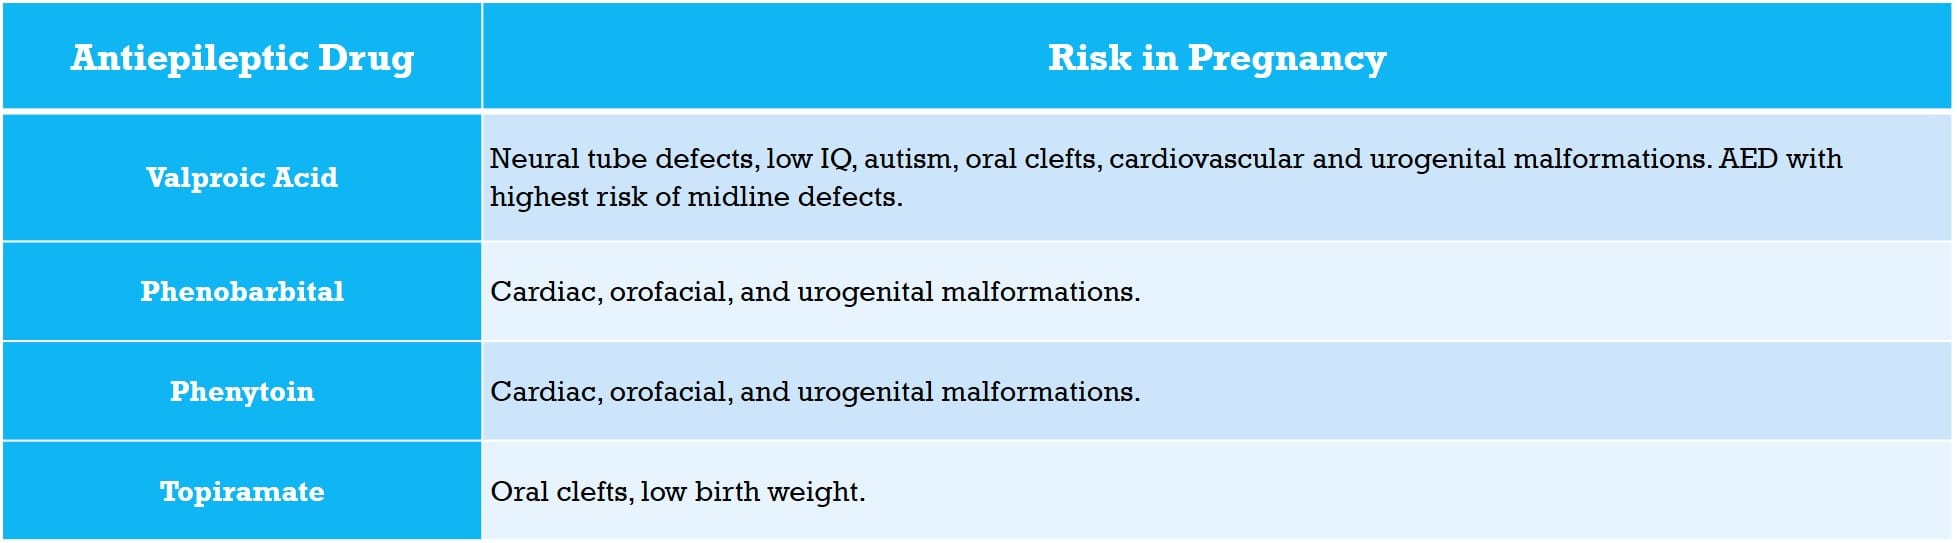 Table of antiepileptic drugs and fetal birth risks